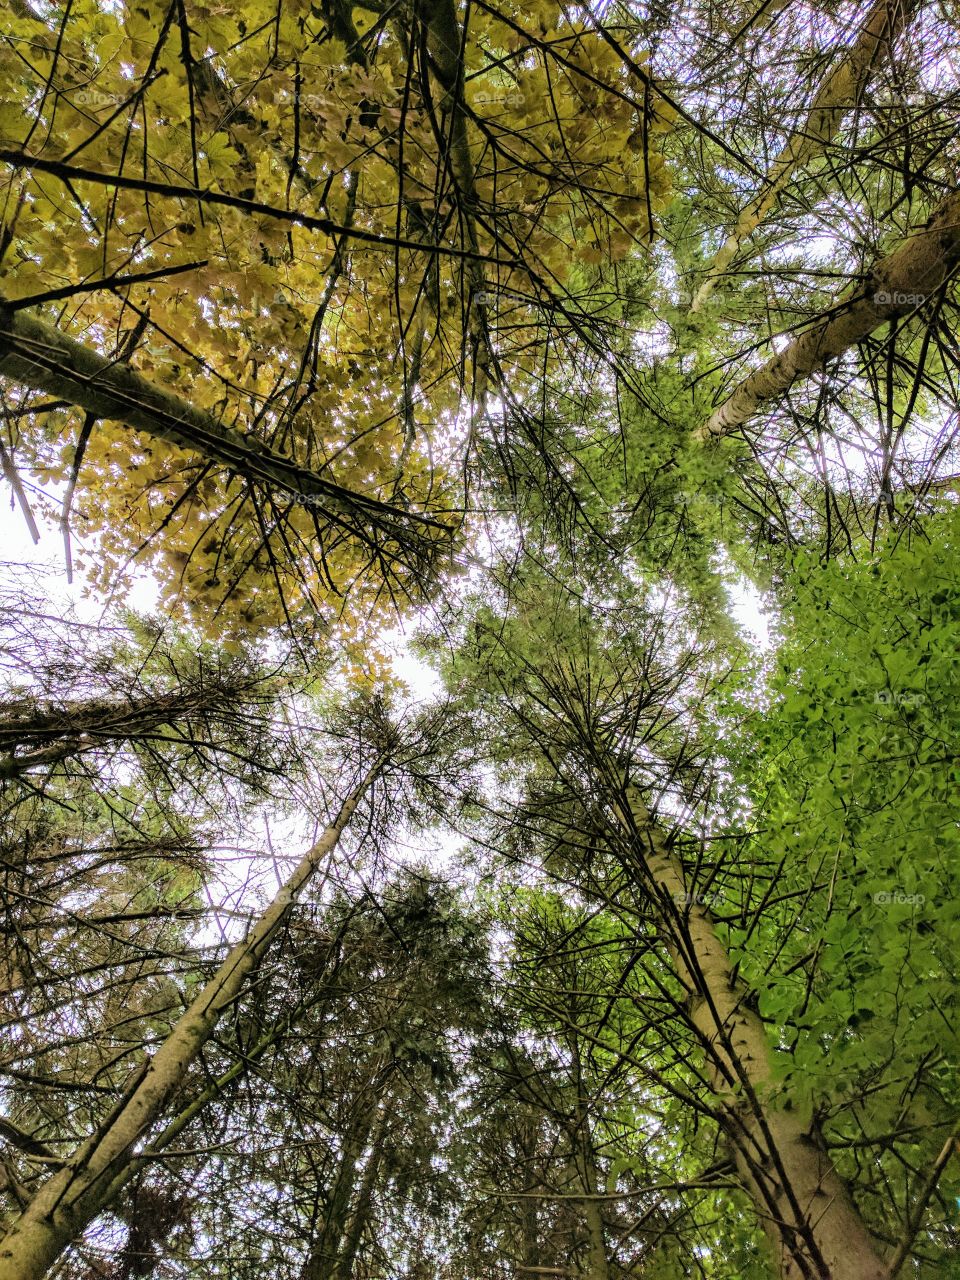 Colorful tree canopy in a forest looking up.